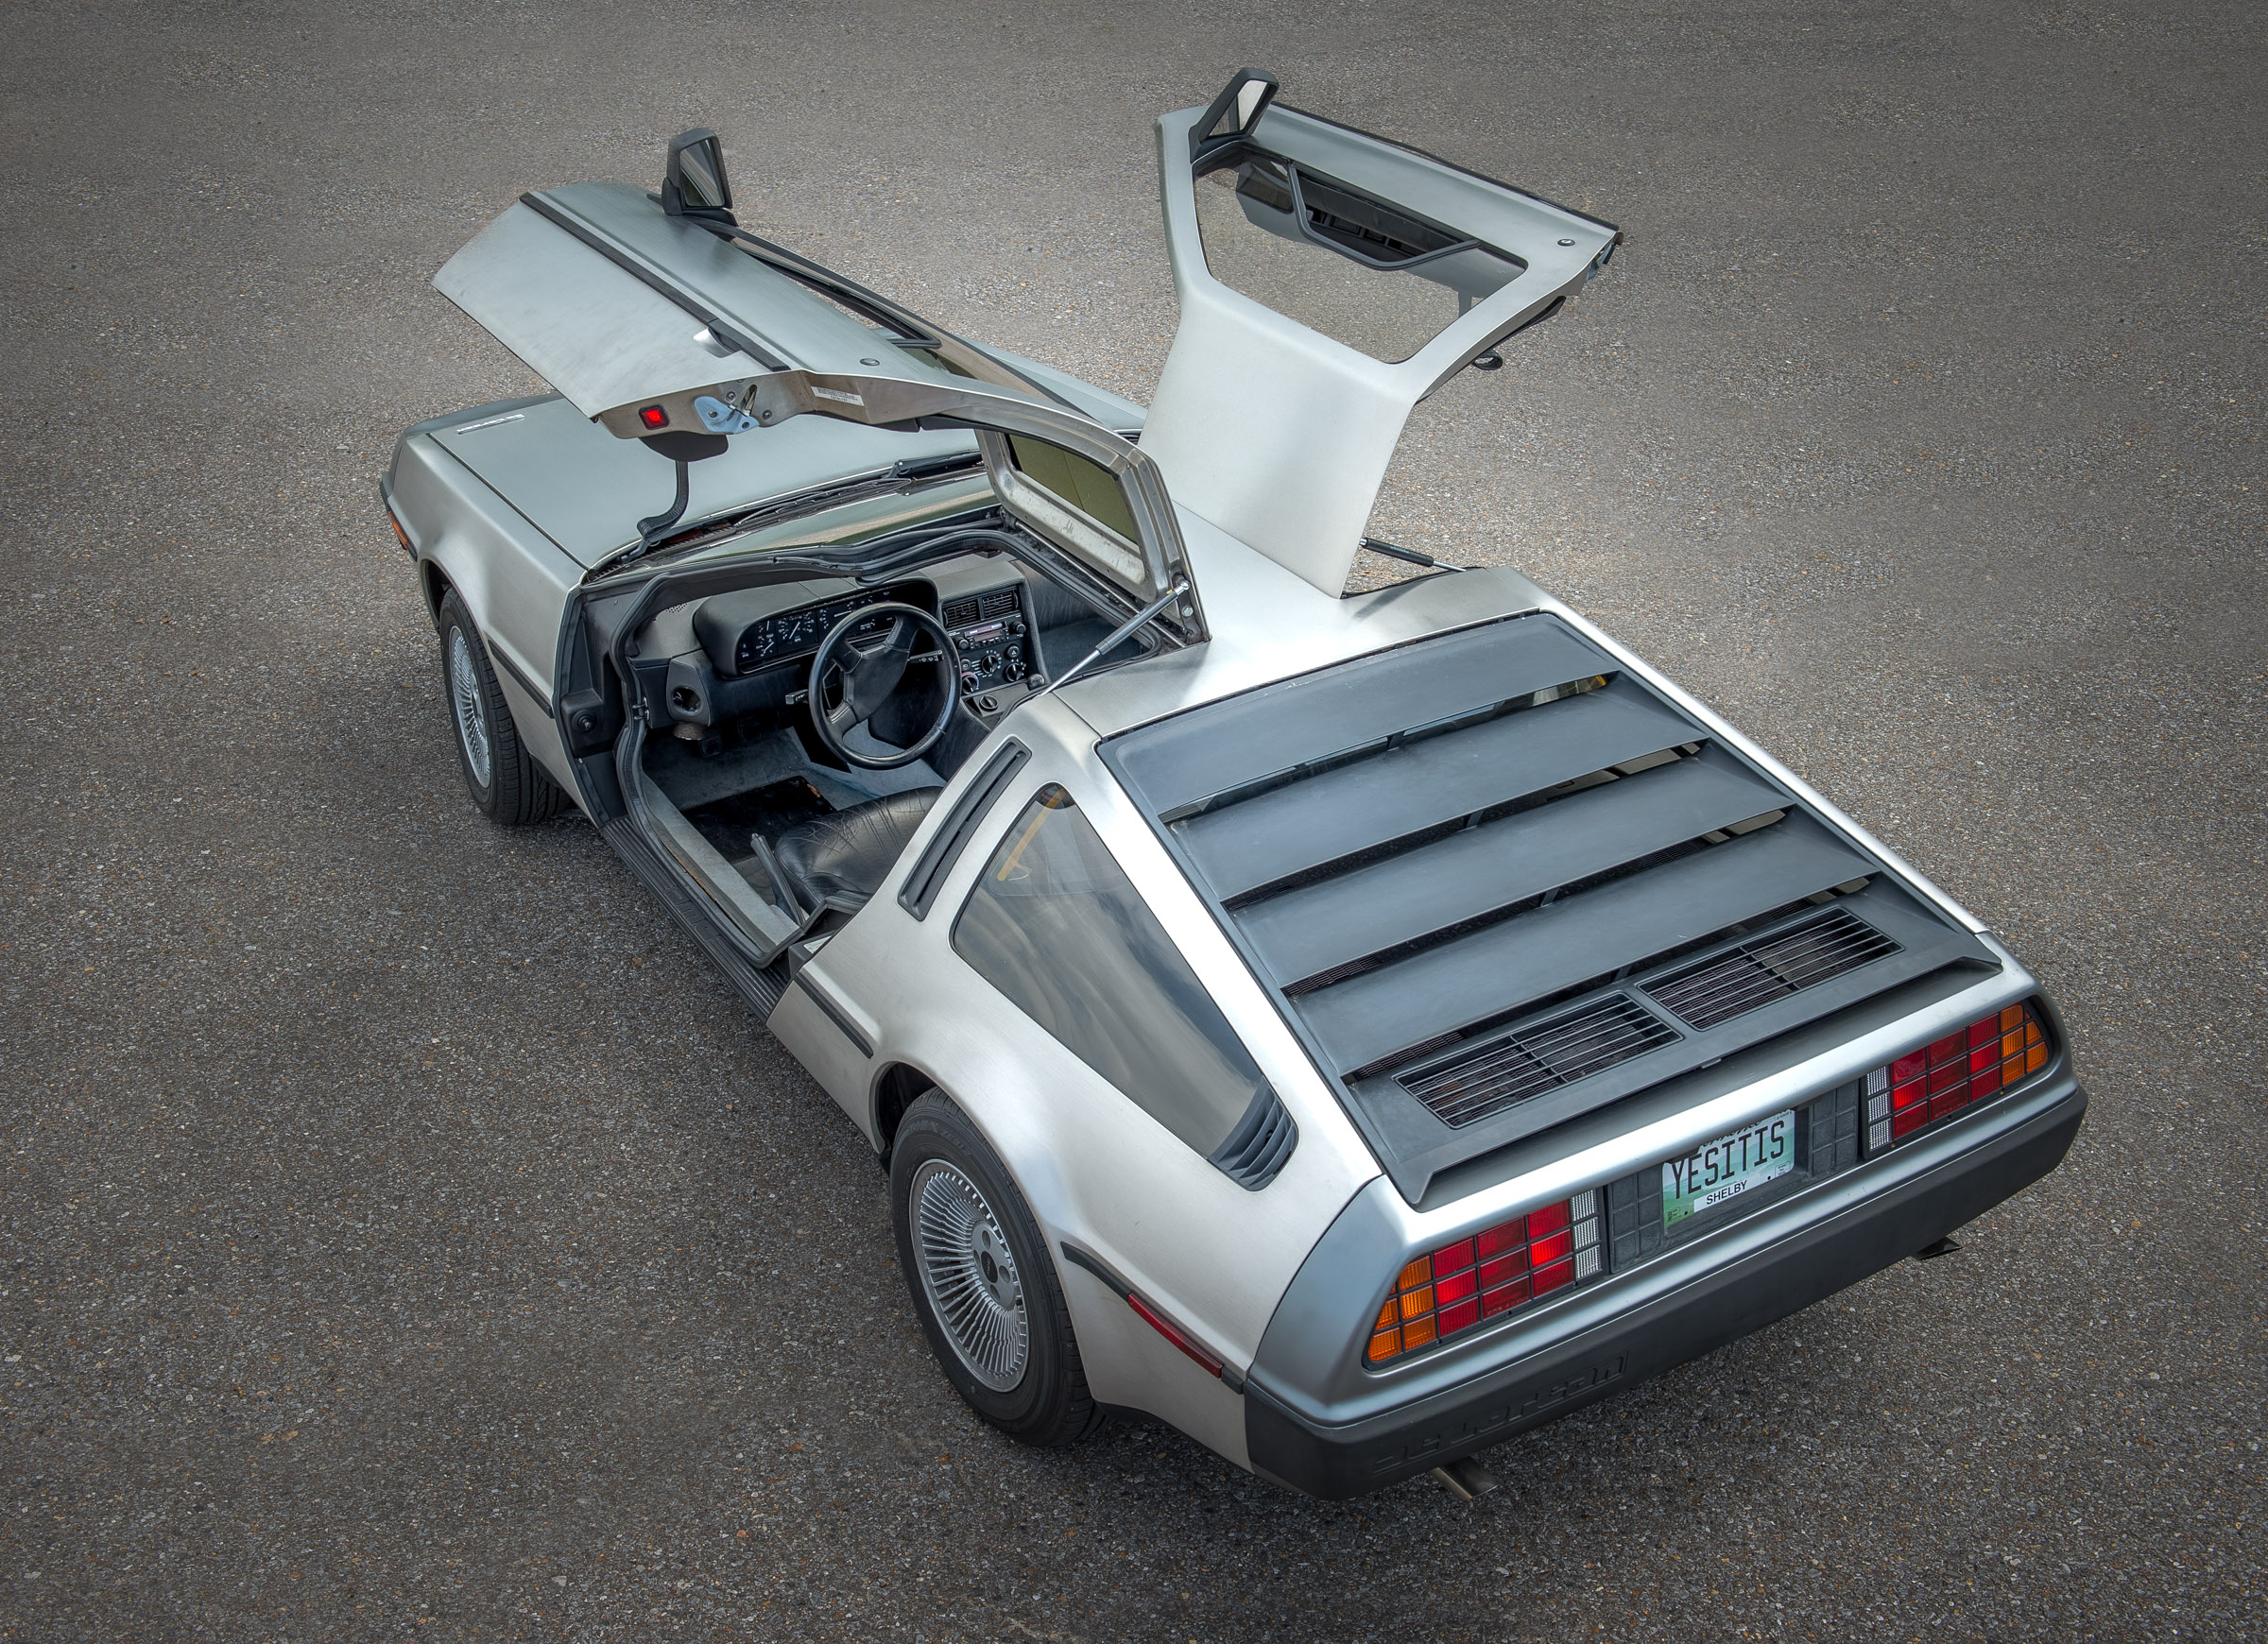 What Happened to the DeLorean?